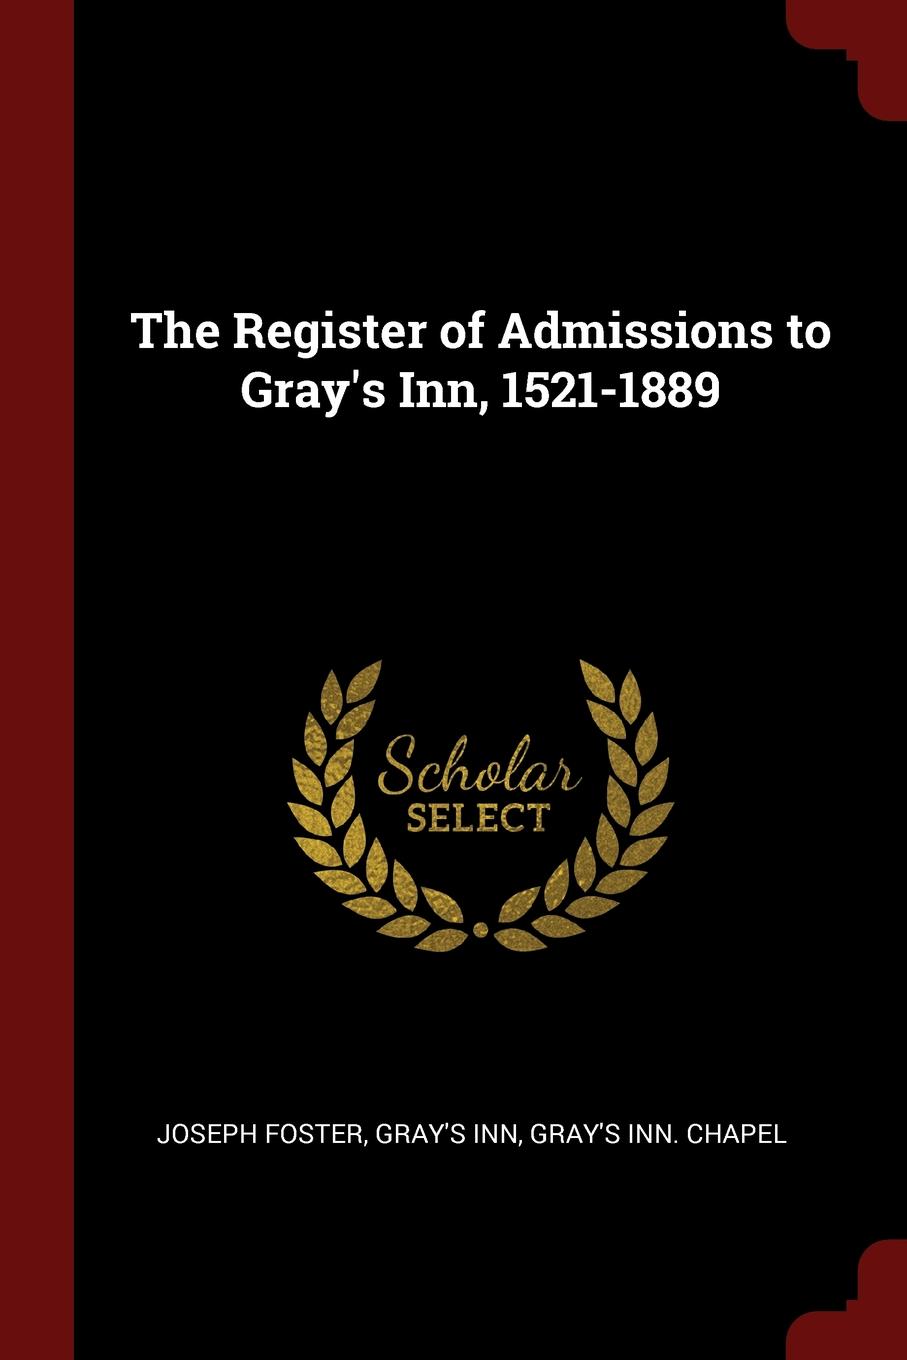 The Register of Admissions to Gray.s Inn, 1521-1889